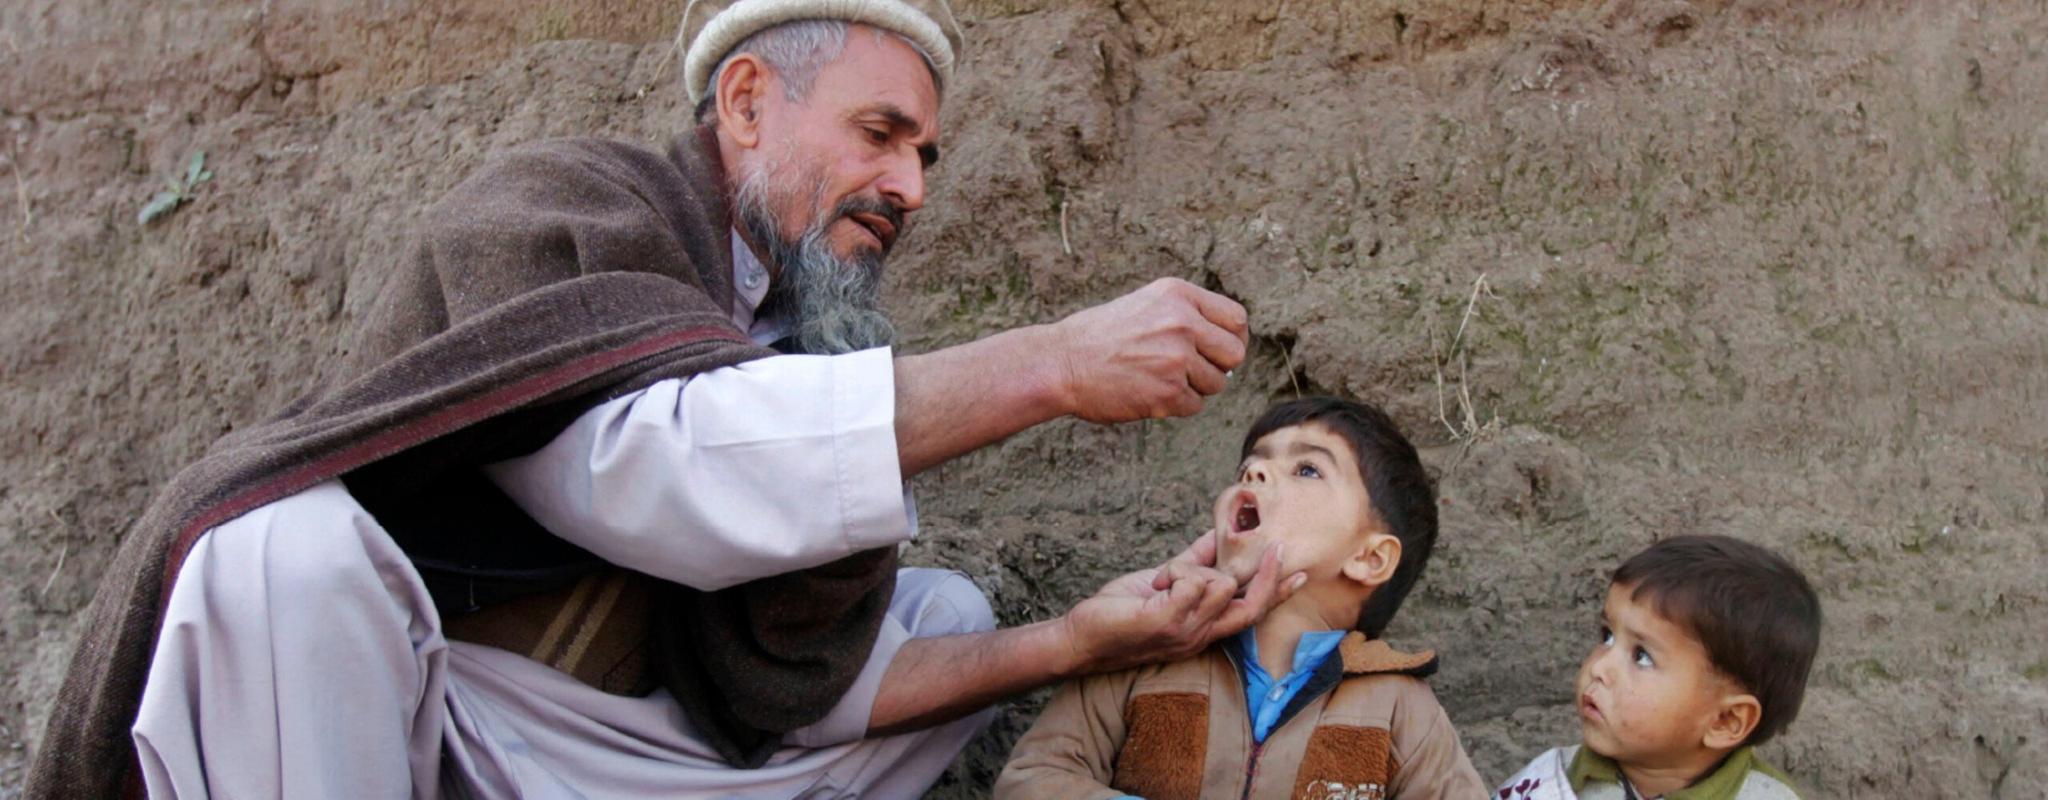 A child receives the polio vaccination during an anti-polio campaign on the outskirts of Jalalabad, Afghanistan